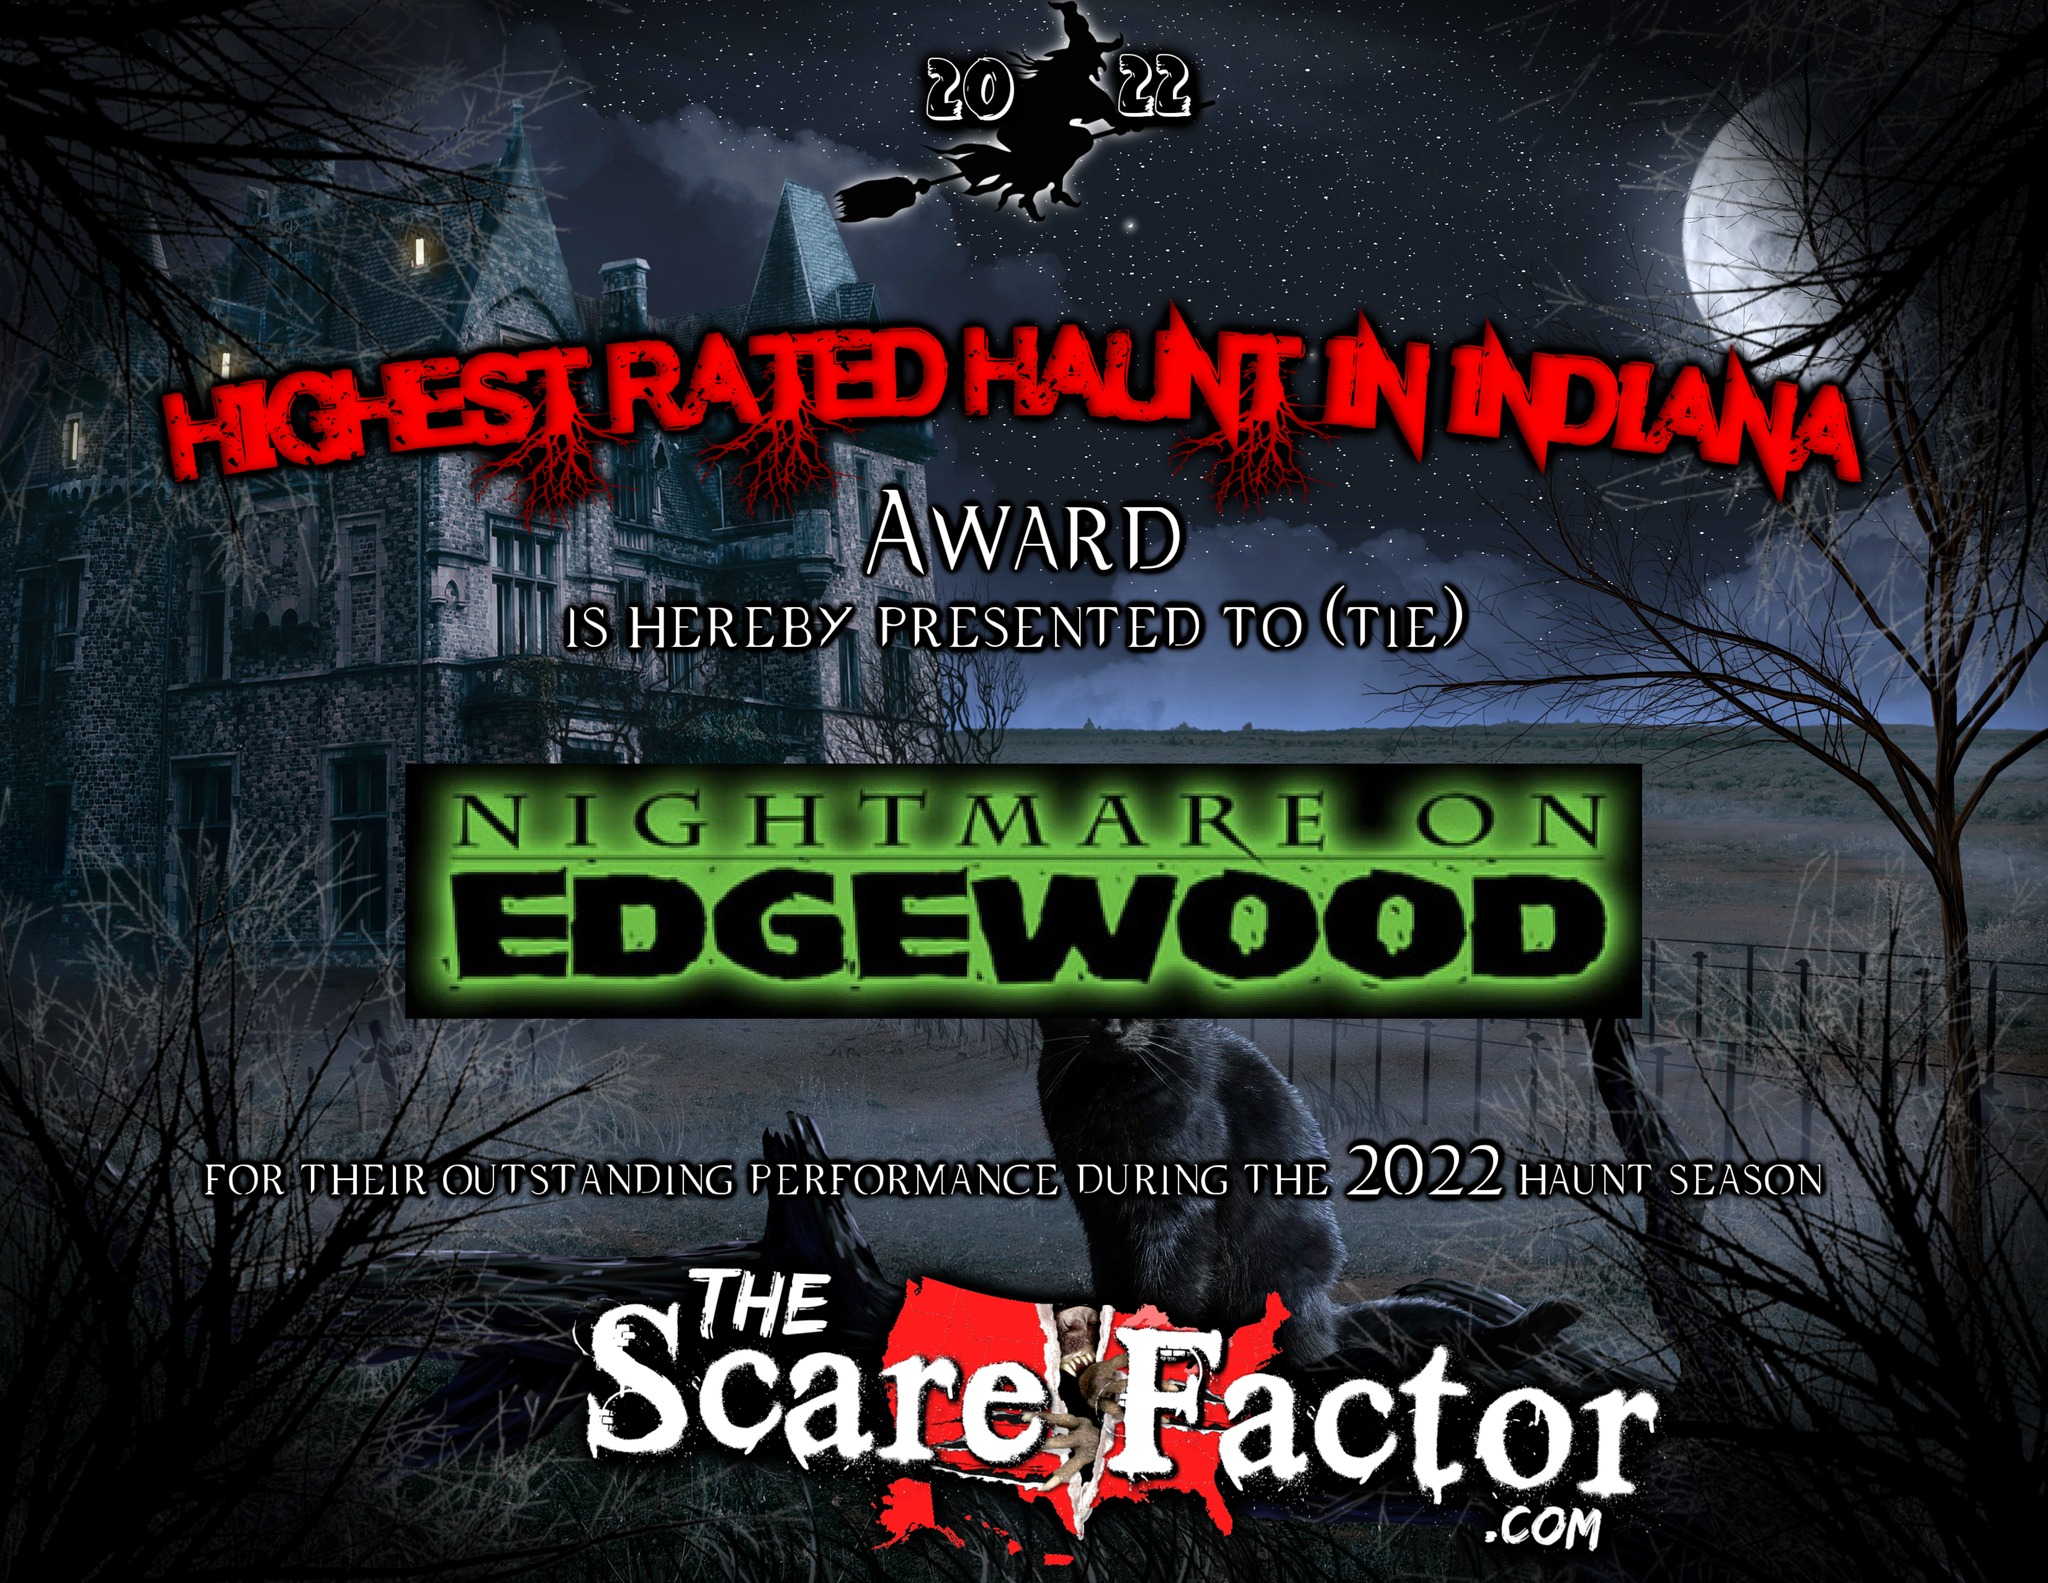 Highest Rated Haunt in Indiana as rated by The Scare Factor